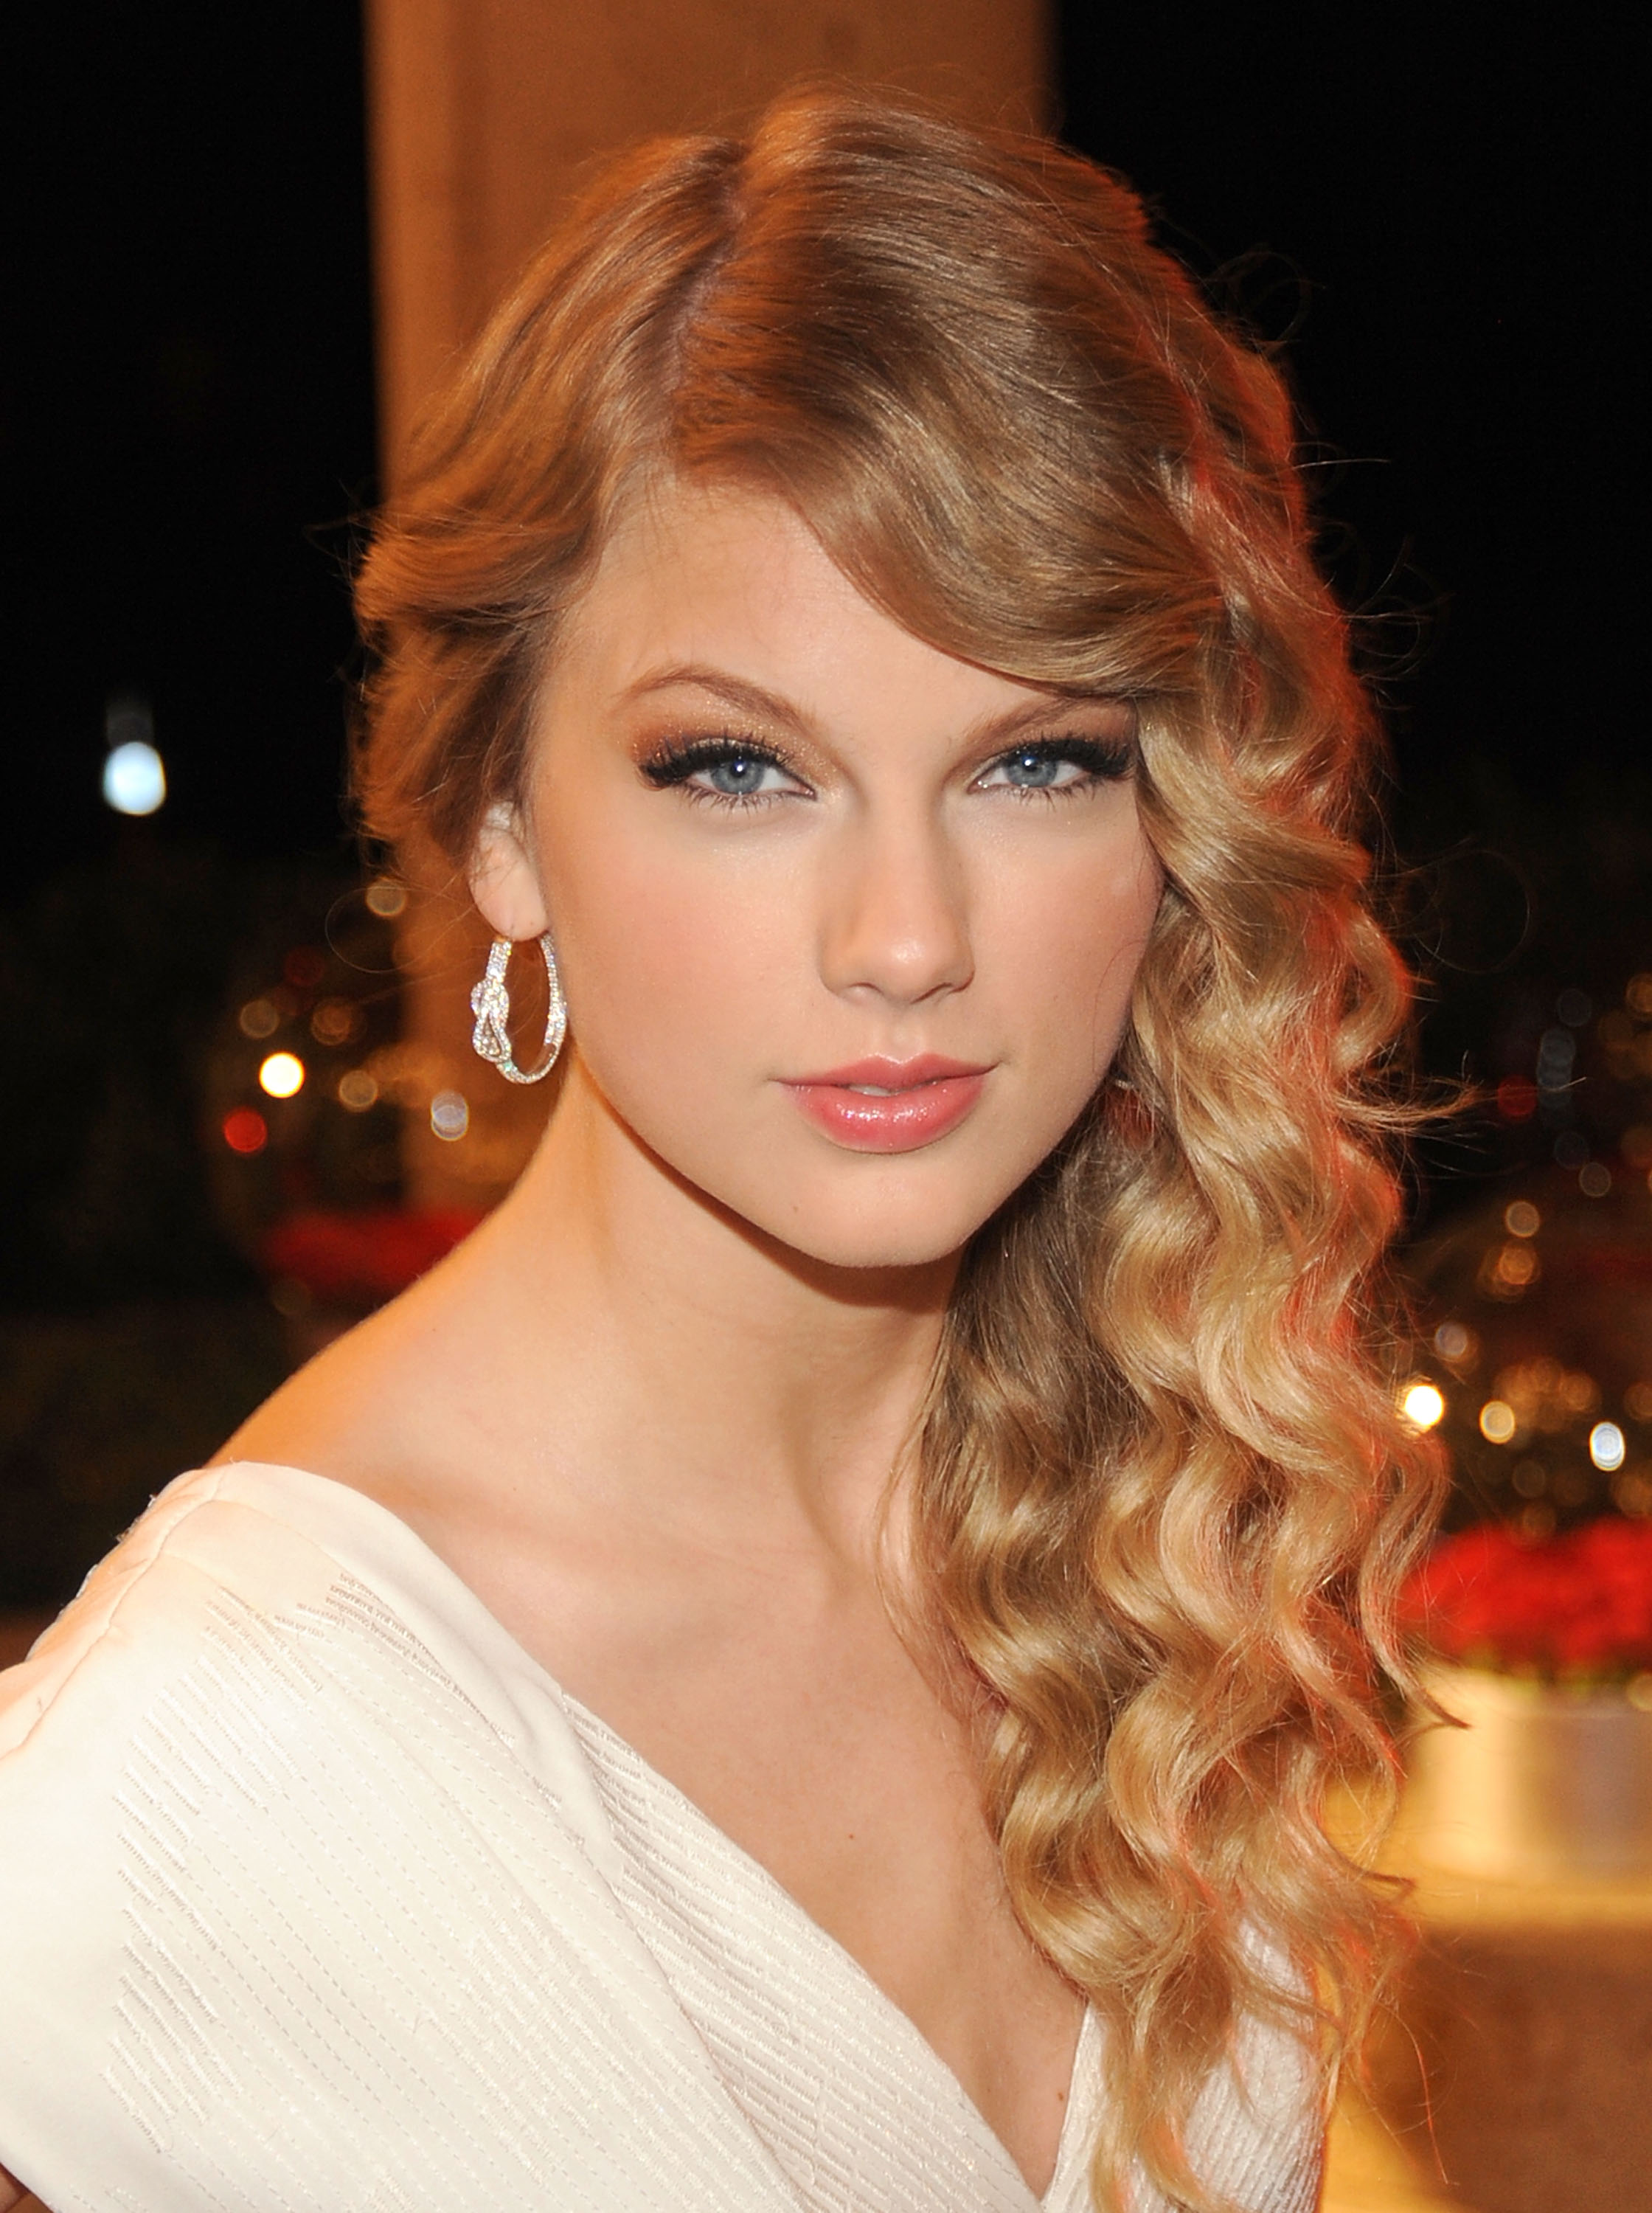 Taylor Swift at the 57th Annual BMI Country Awards at BMI on November 10, 2009 in Nashville, Tennessee.